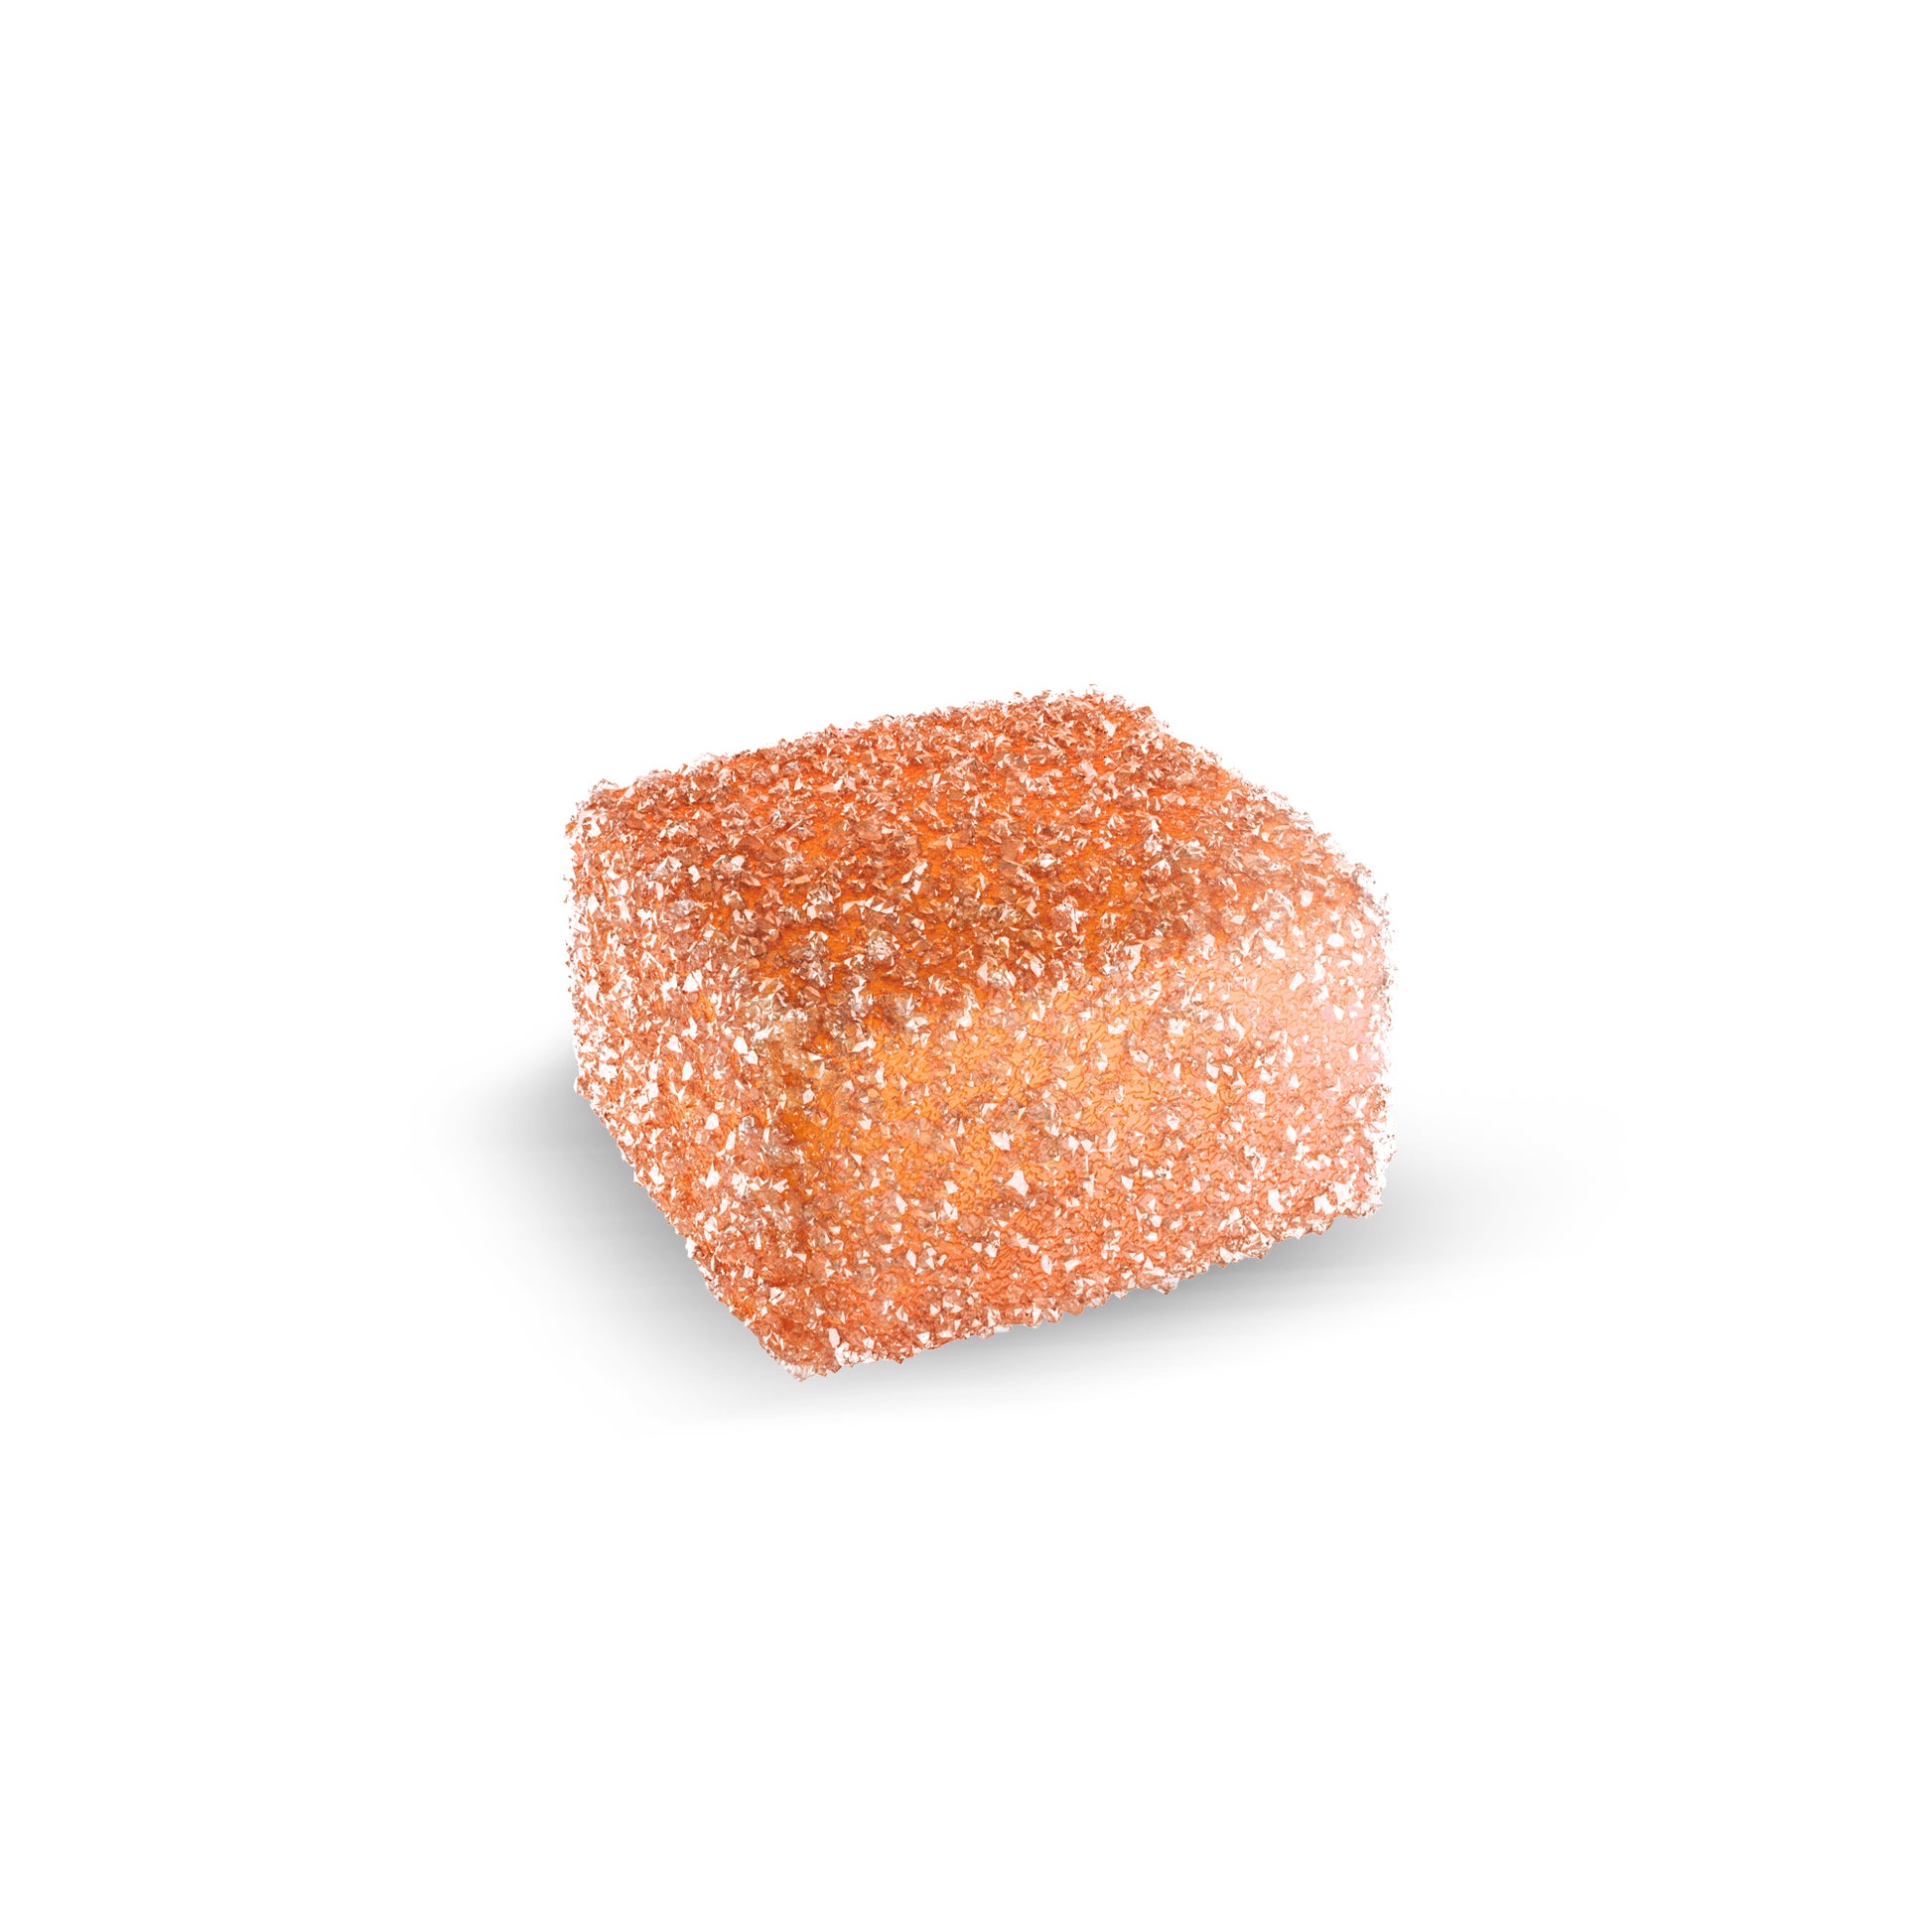 Infused by LEVO Be Well Gummies orange flavored with immunity support. Single gummy.